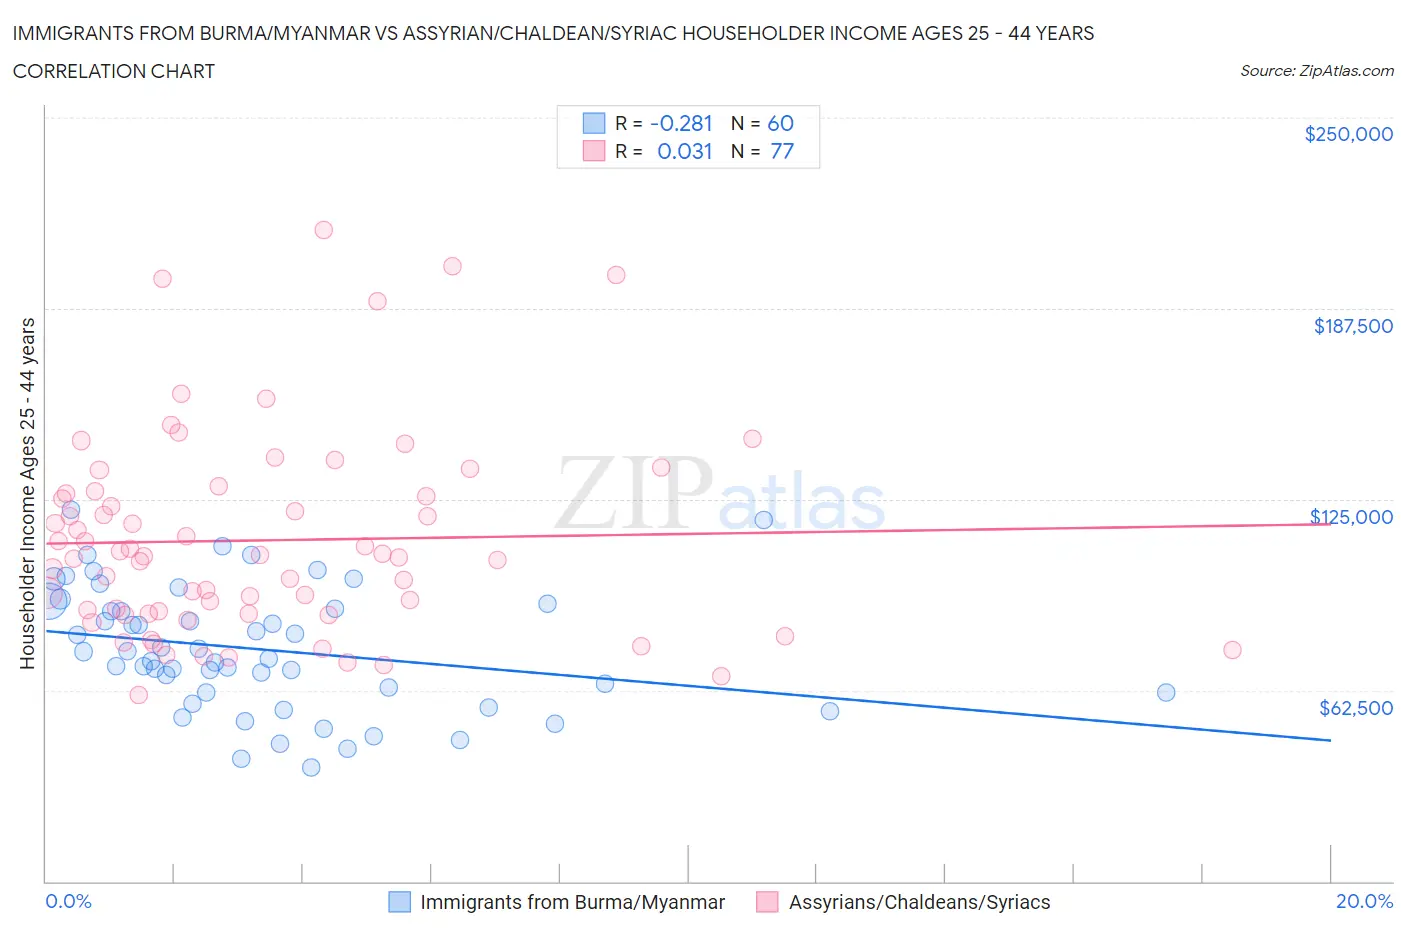 Immigrants from Burma/Myanmar vs Assyrian/Chaldean/Syriac Householder Income Ages 25 - 44 years